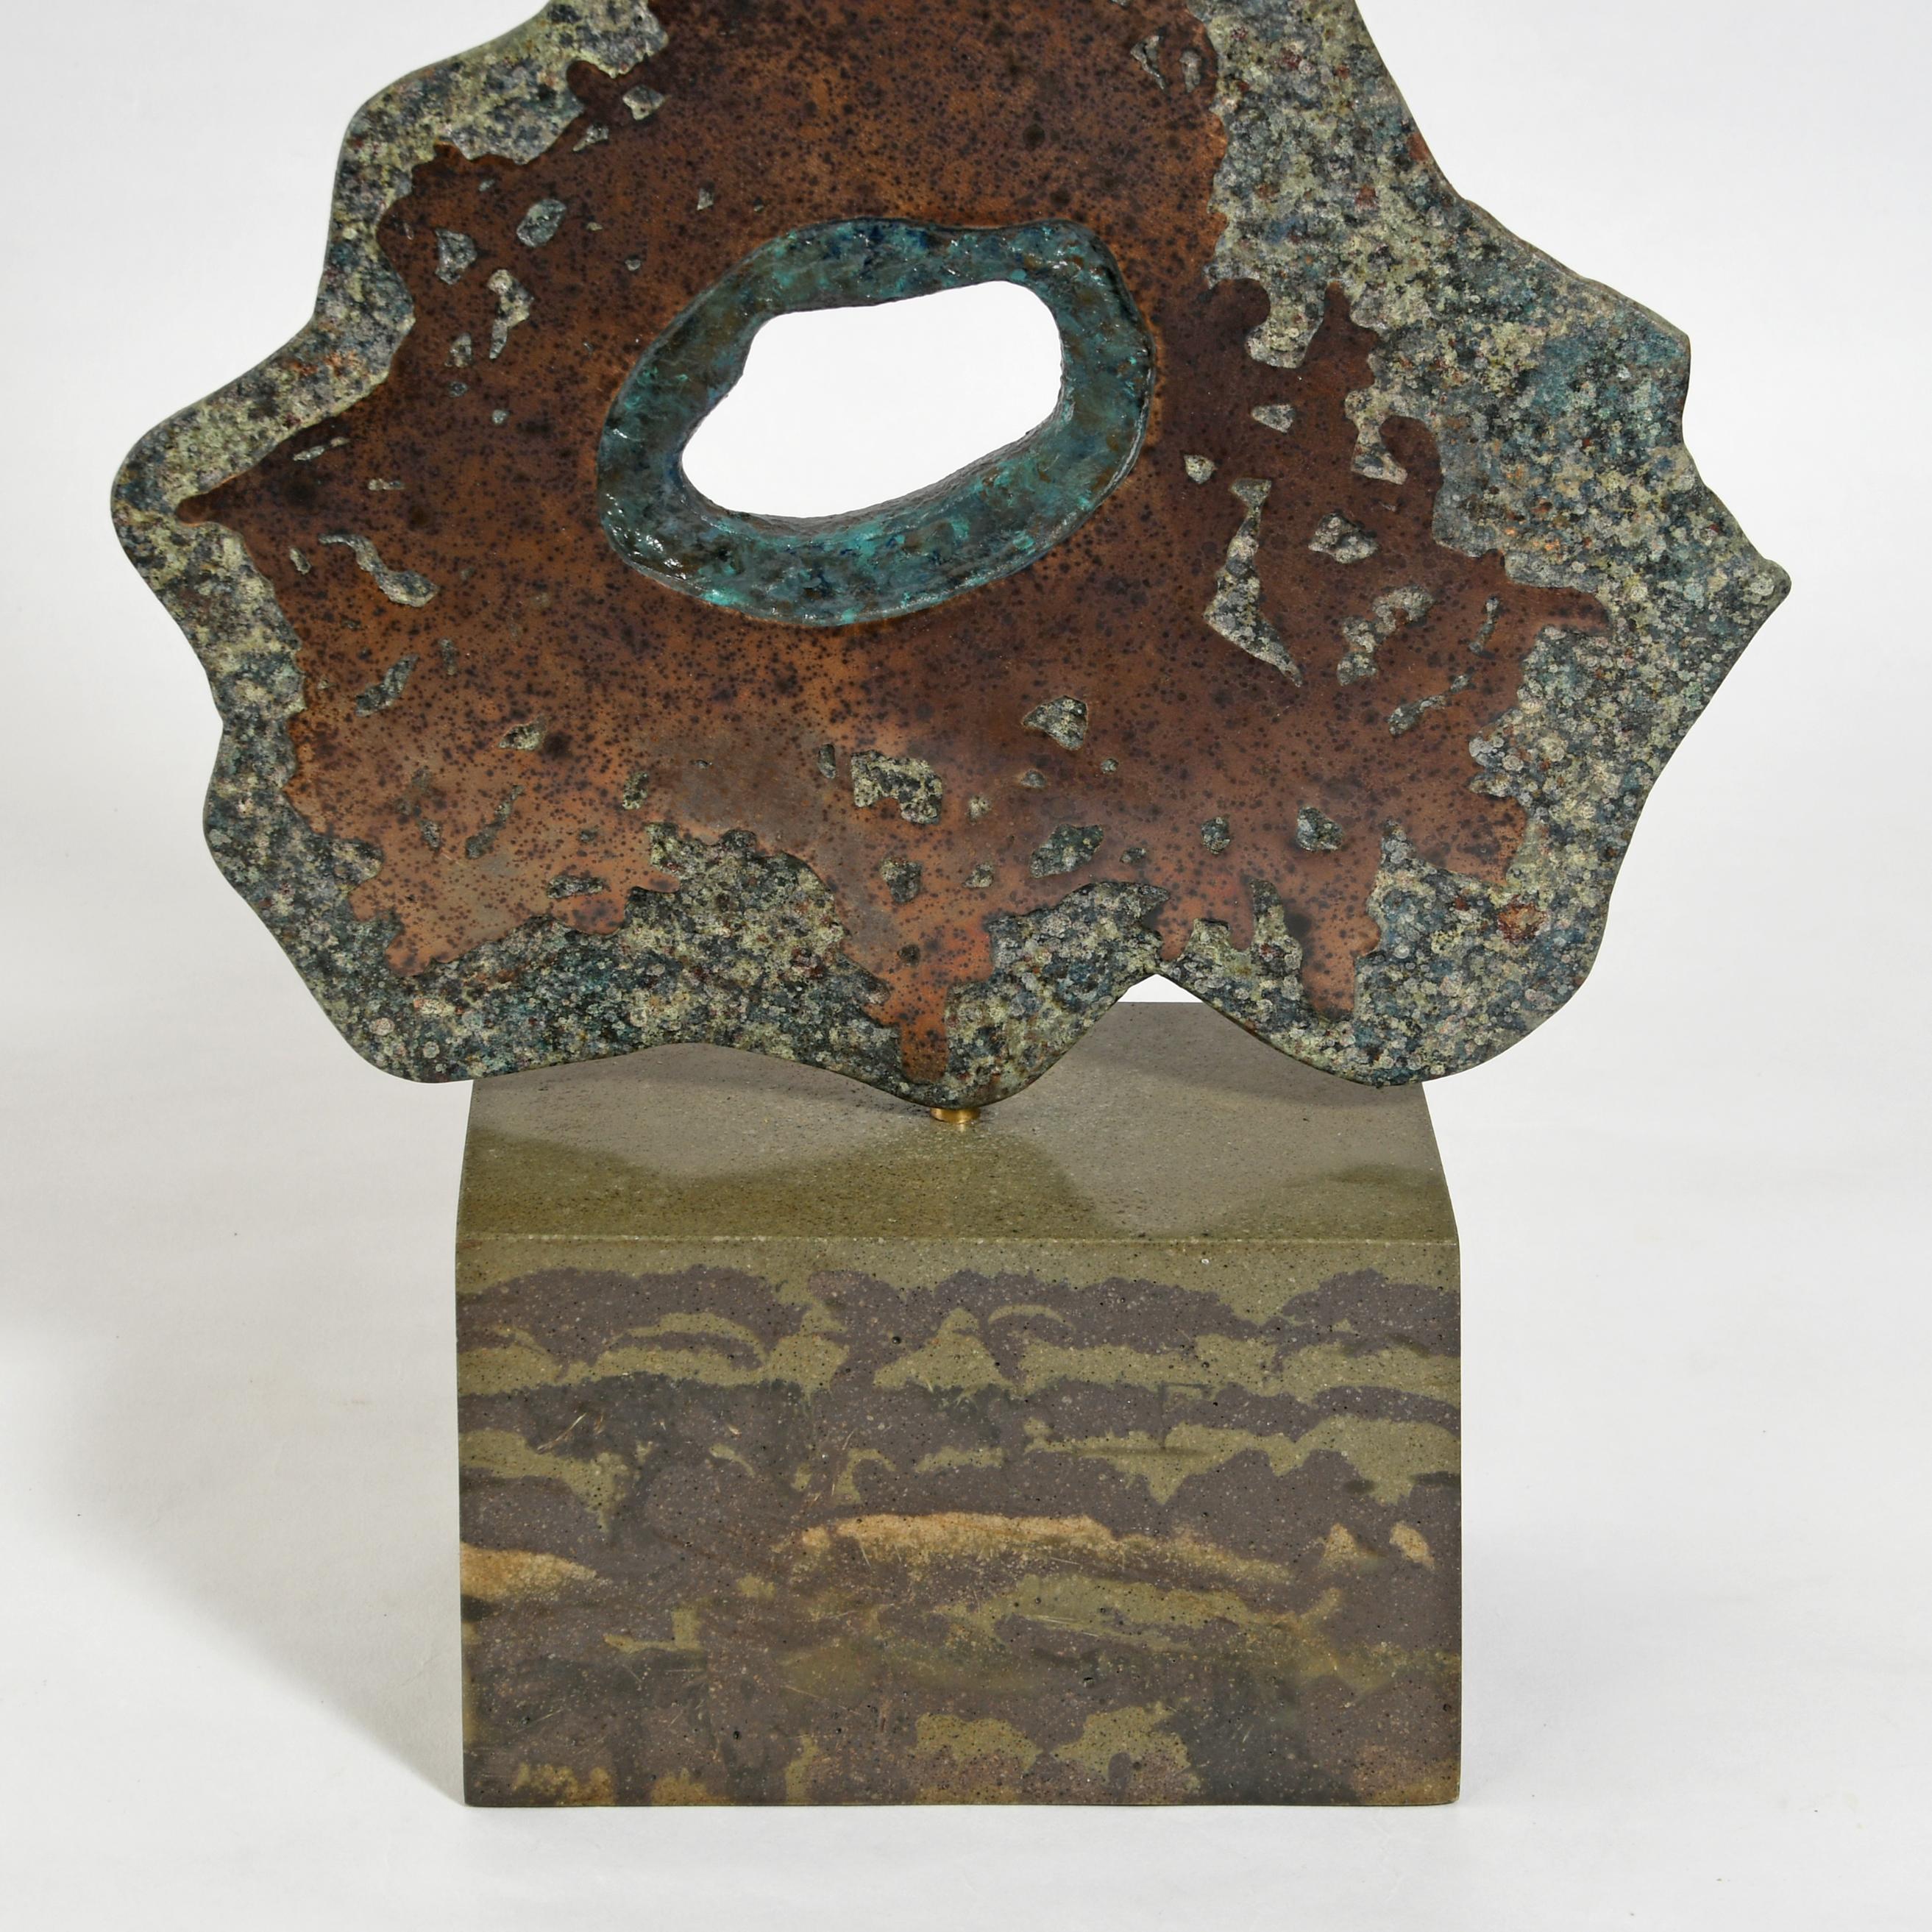 British Contemporary Sculpture by Philip Hearsey - Of this Land 6